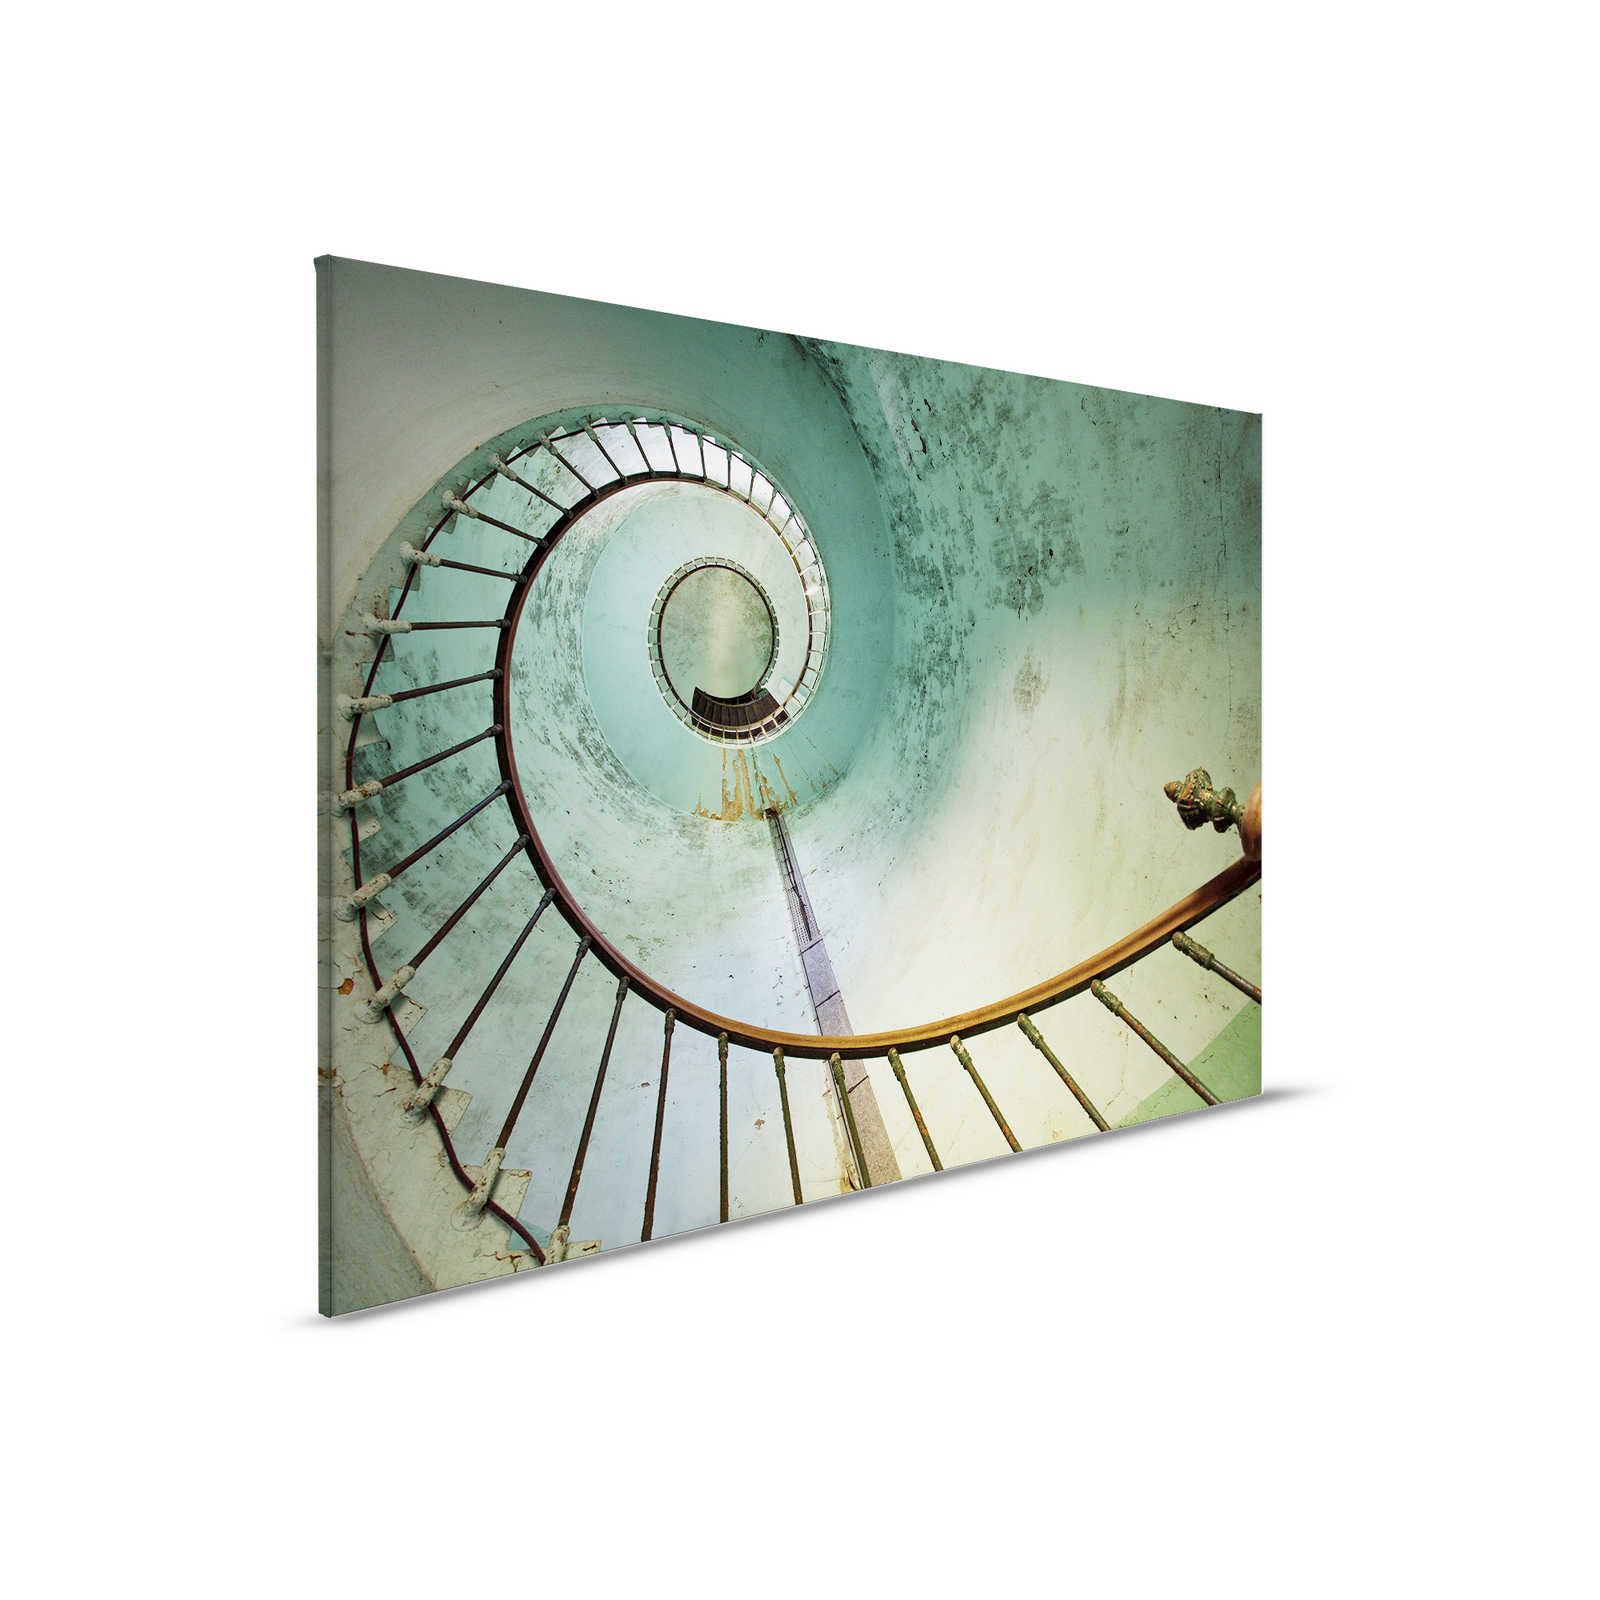         Canvas painting old staircase with spiral staircase - 0,90 m x 0,60 m
    